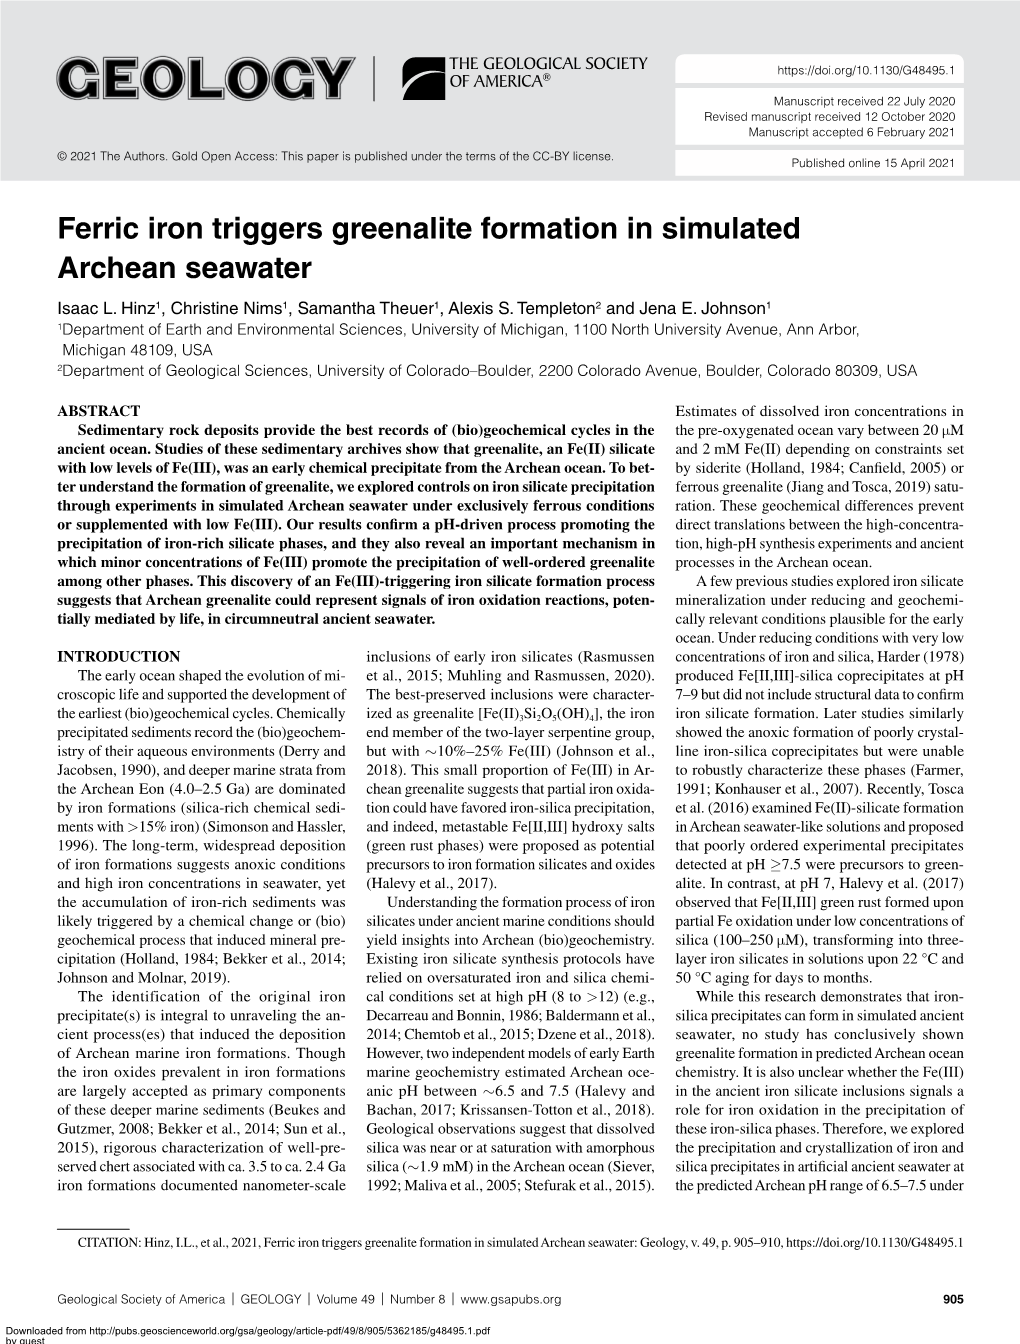 Ferric Iron Triggers Greenalite Formation in Simulated Archean Seawater Isaac L